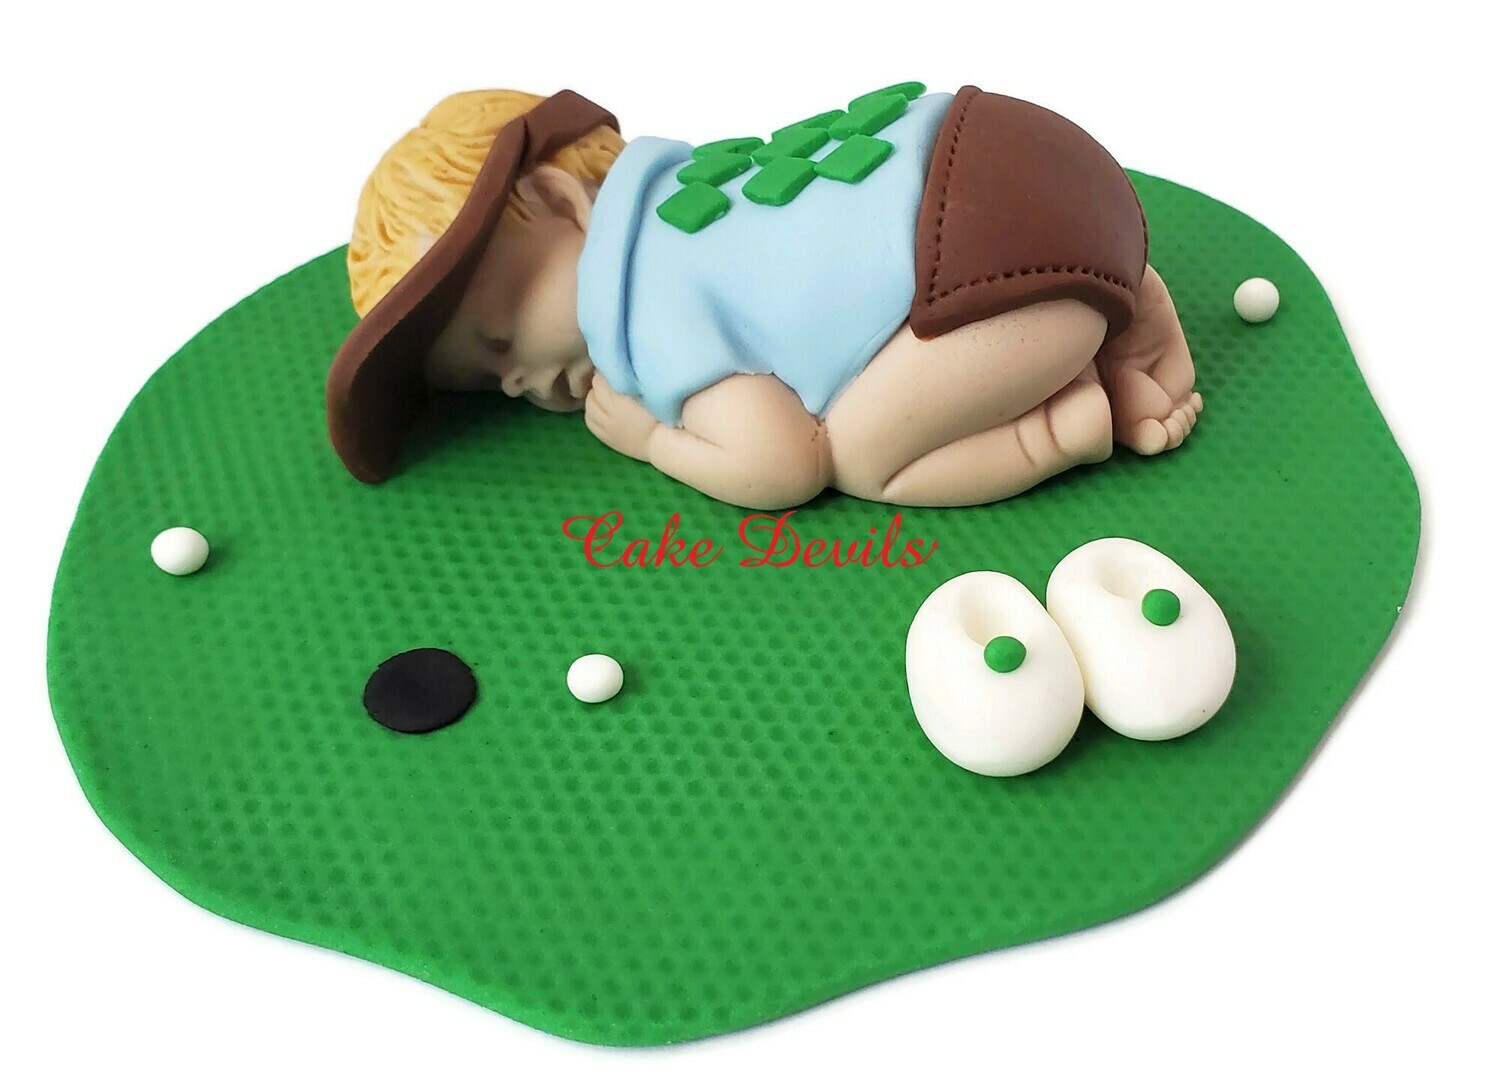 Golf Baby Shower Cake Topper, Fondant Sleeping Baby Cake Decorations, Hole in one baby shower theme